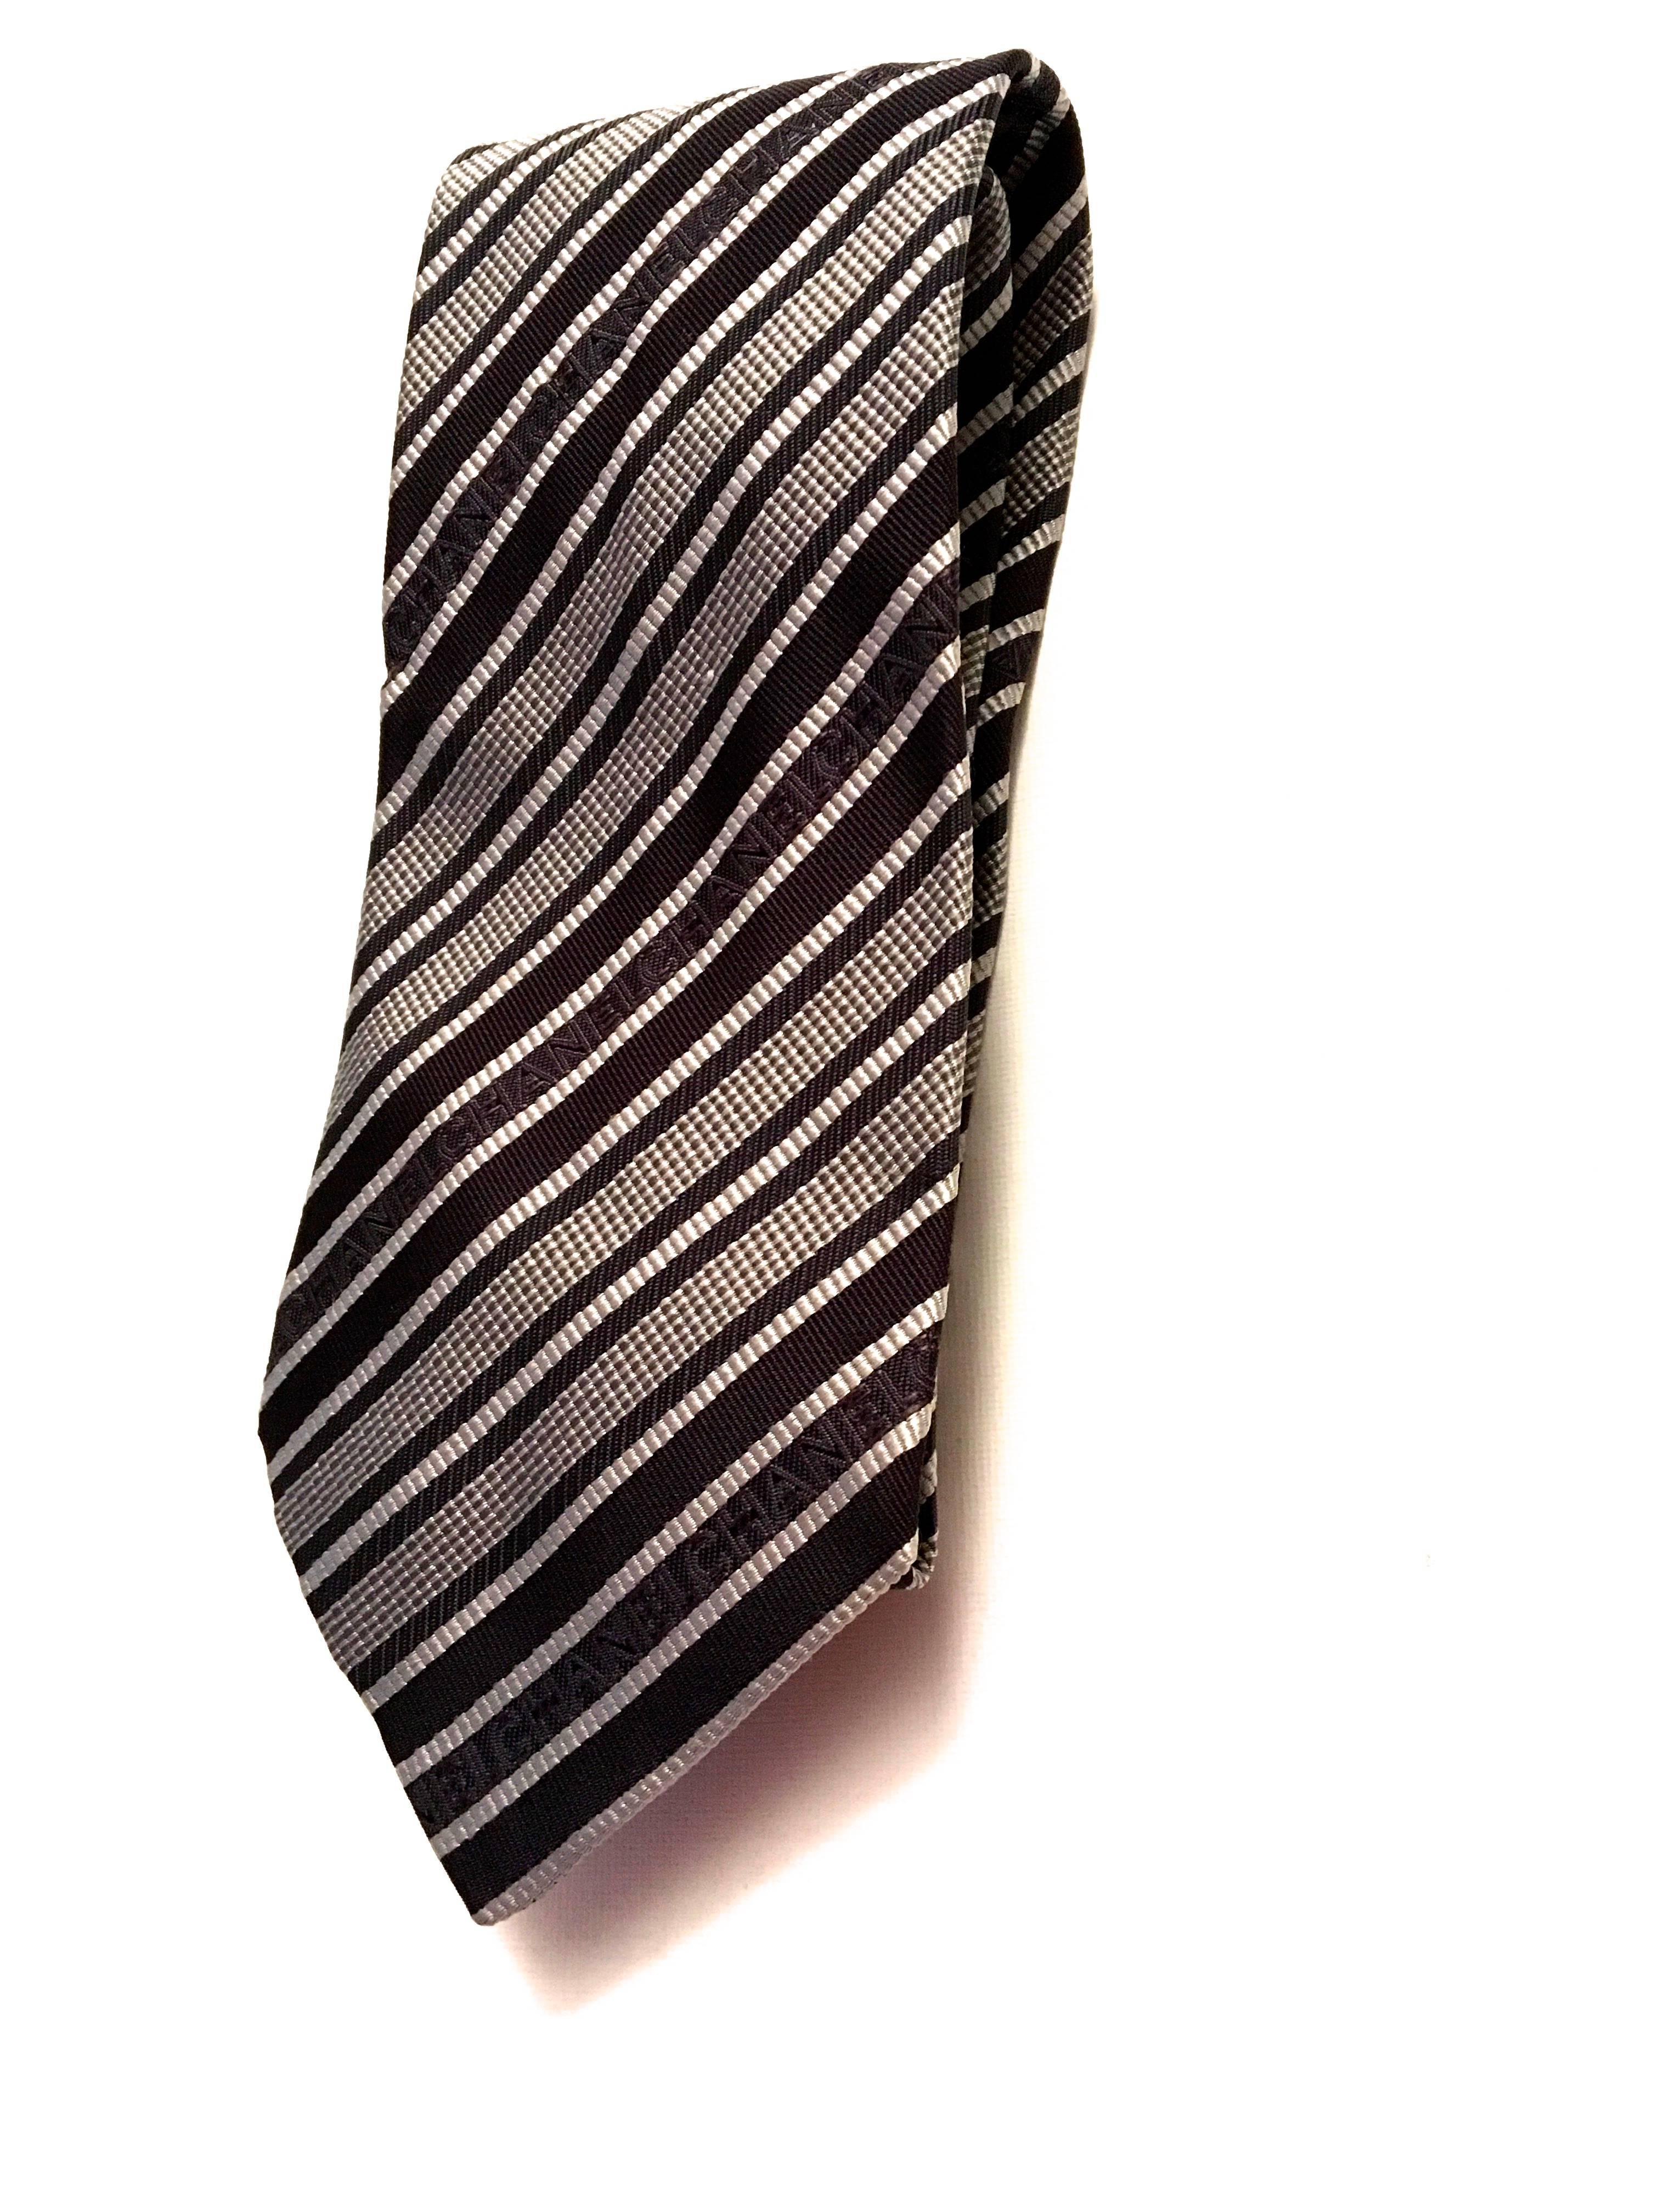 Presented here is a beautiful necktie from Chanel’s couture collection. This beautiful tie is made from 100% silk and is composed of silver, gray and black stripes. ‘Chanel’ is written in the body of the tie’s design. This tie has a classic styling